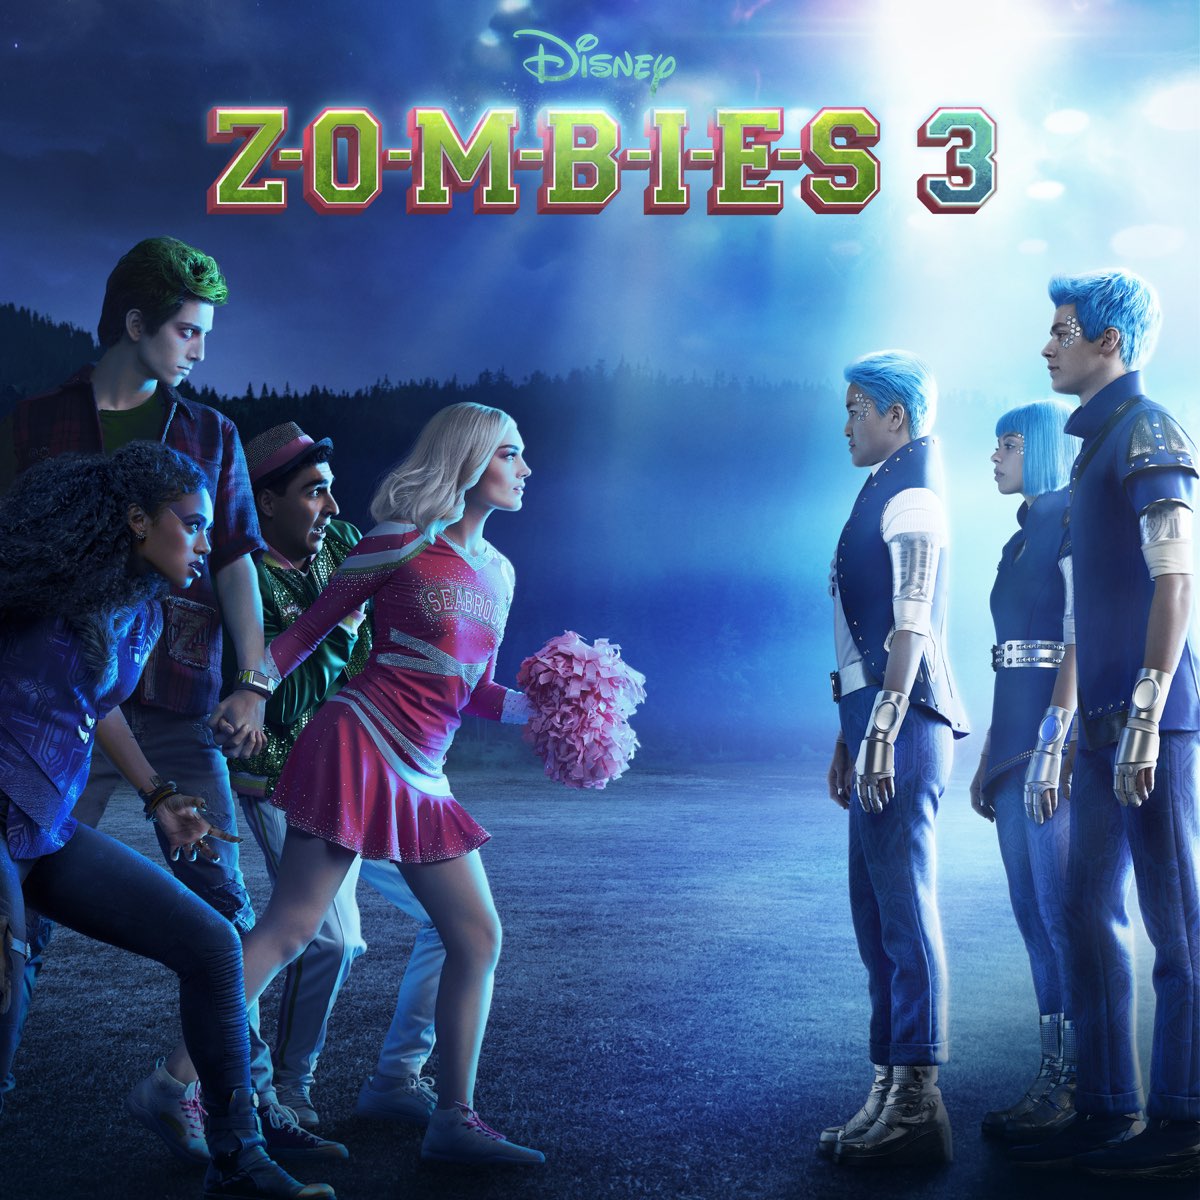 ‎ZOMBIES 3 (Original Soundtrack) by ZOMBIES – Cast on Apple Music